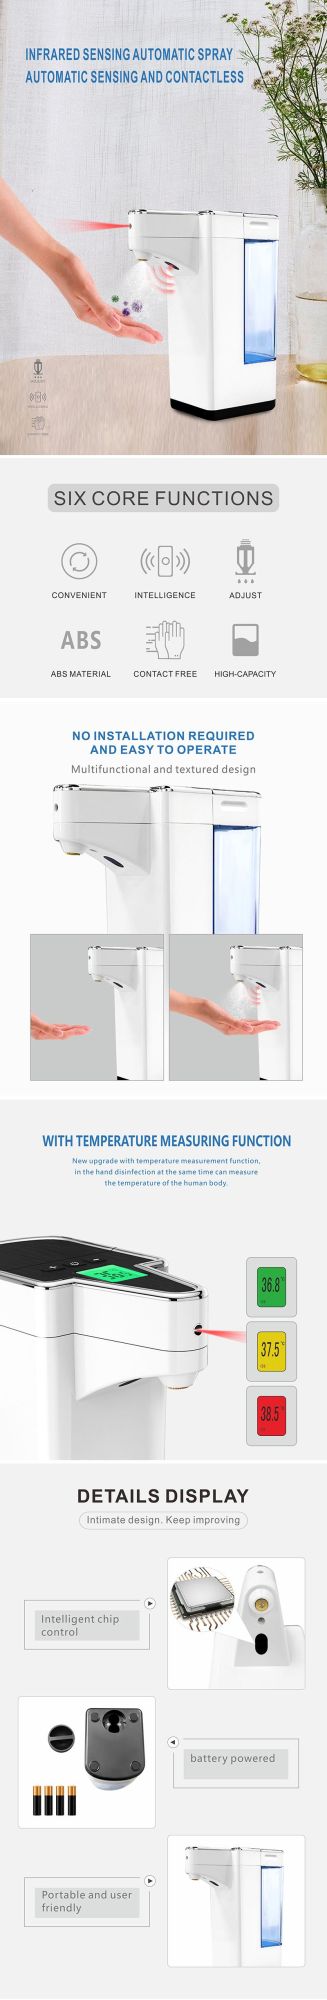 Easy Refill Table Dispenser Soap Dispenser with Temperature Thermometer